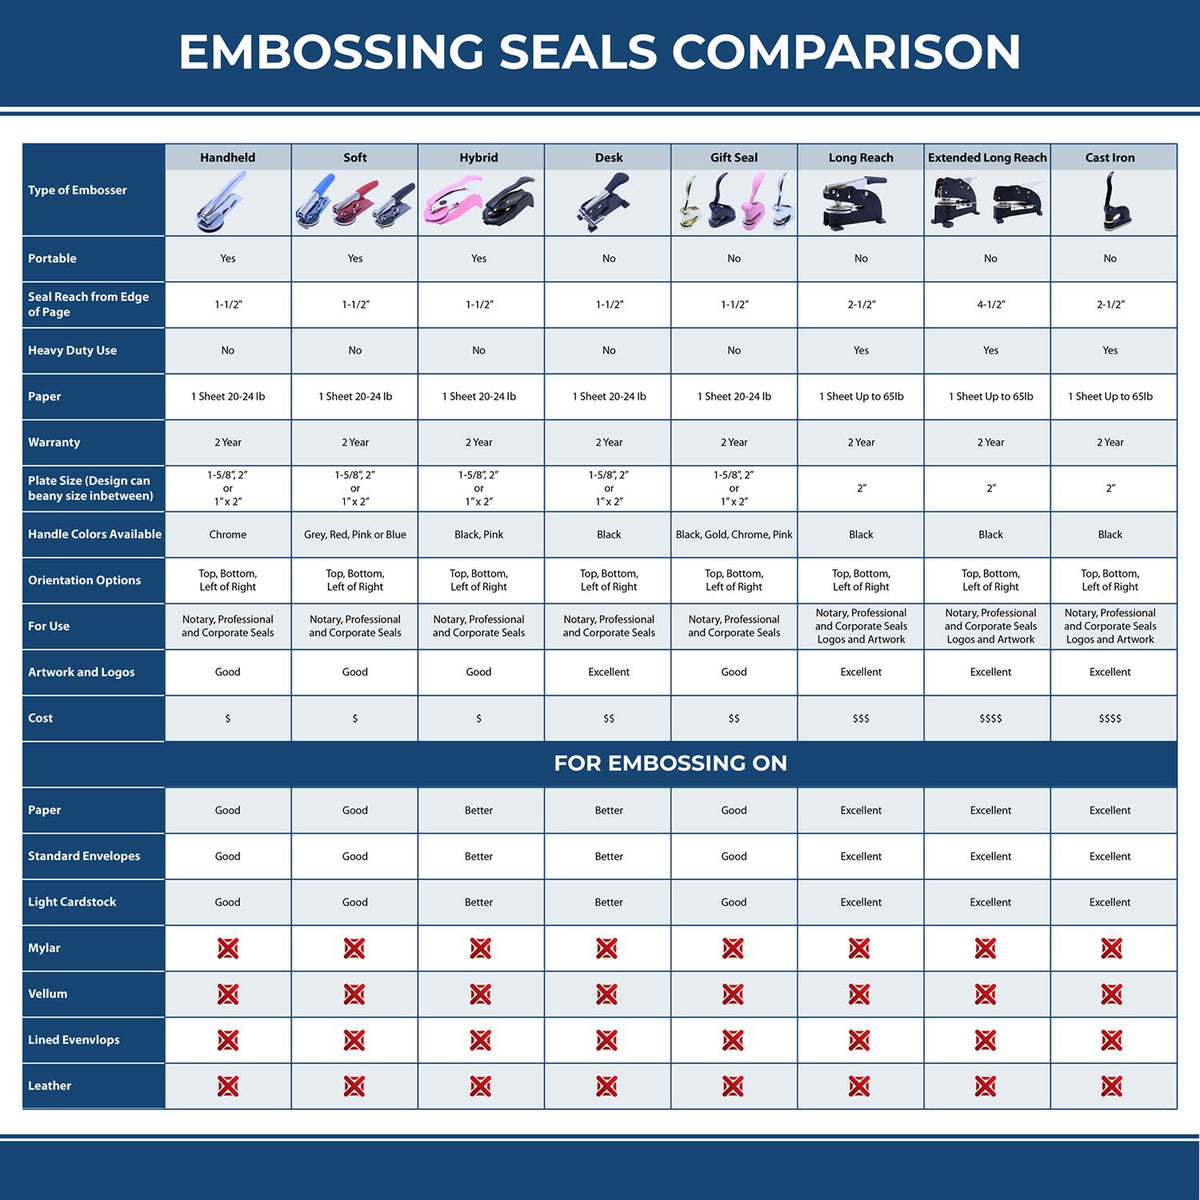 A comparison chart for the different types of mount models available for the Handheld Maryland Professional Geologist Embosser